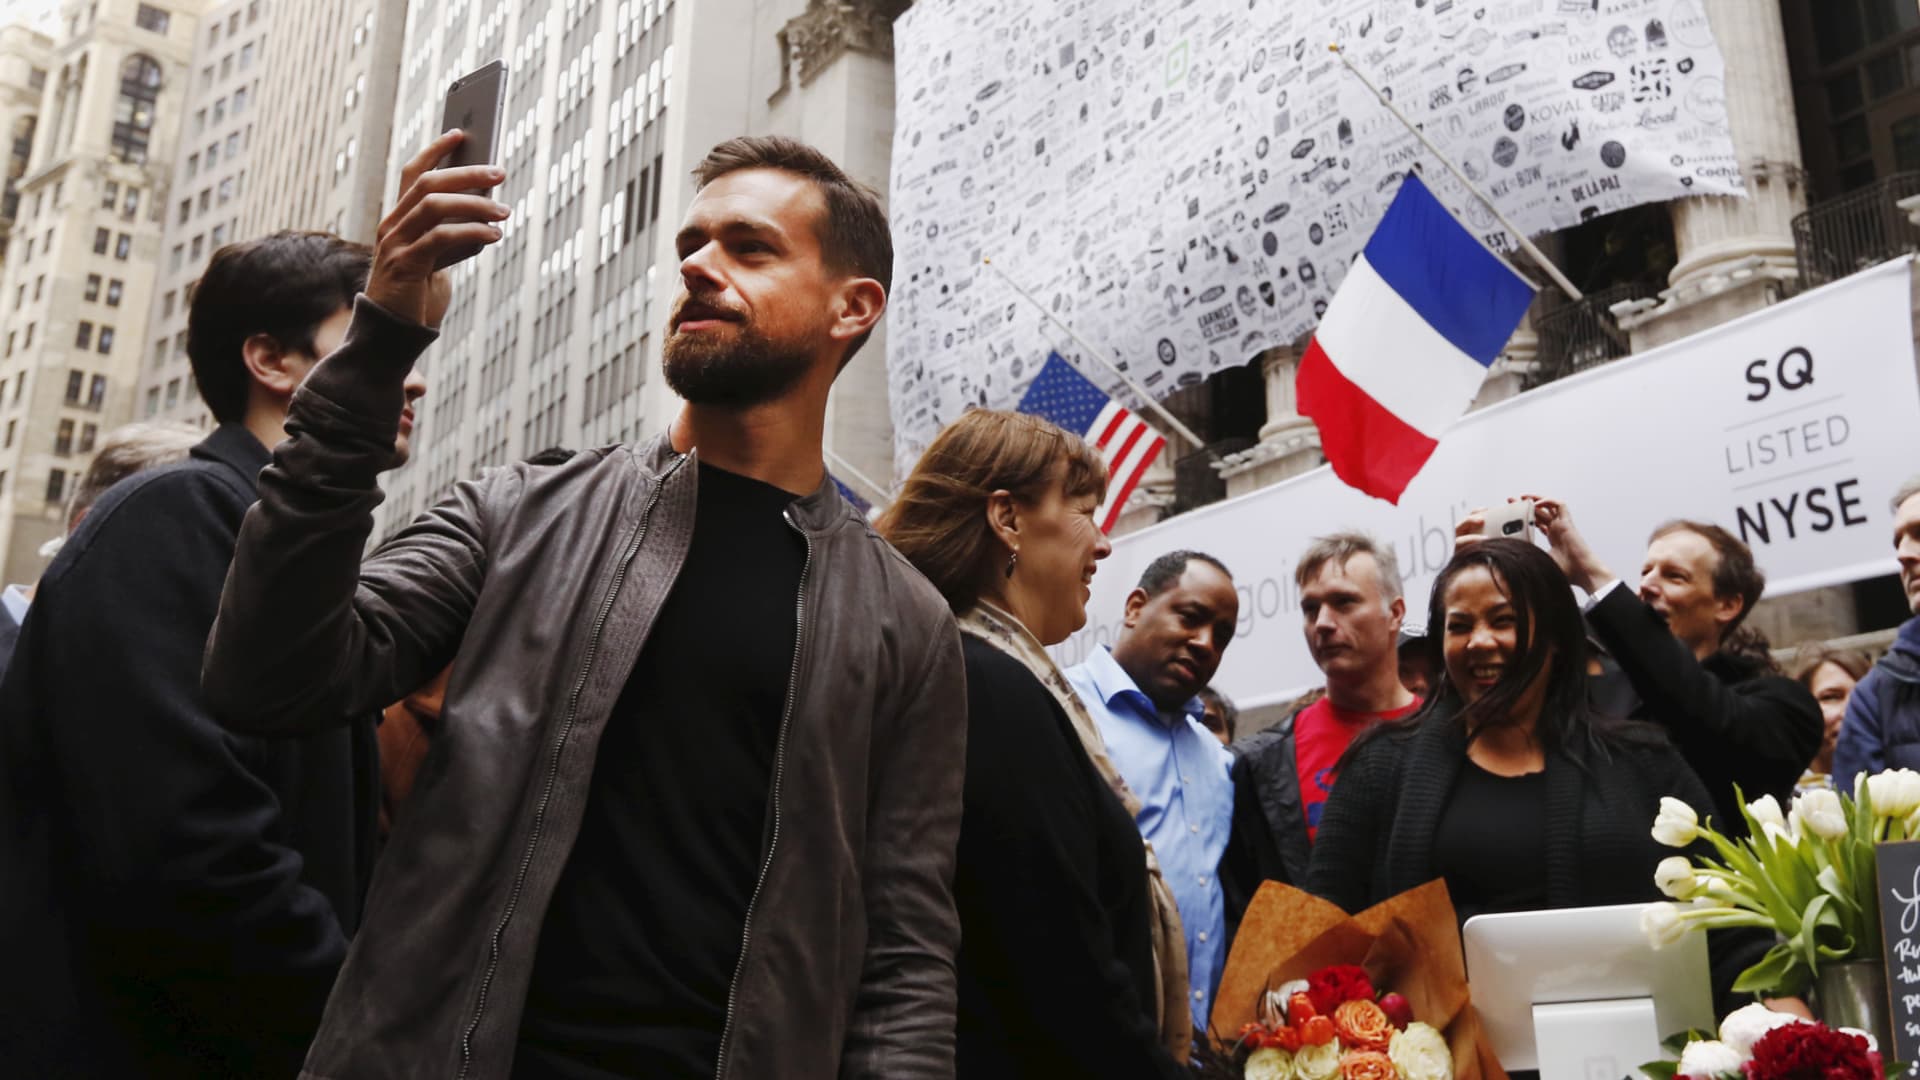 Jack Dorsey (L), CEO of Square and CEO of Twitter, live casts video while standing outside the New York Stock Exchange for the IPO of Square, in New York November 19, 2015.